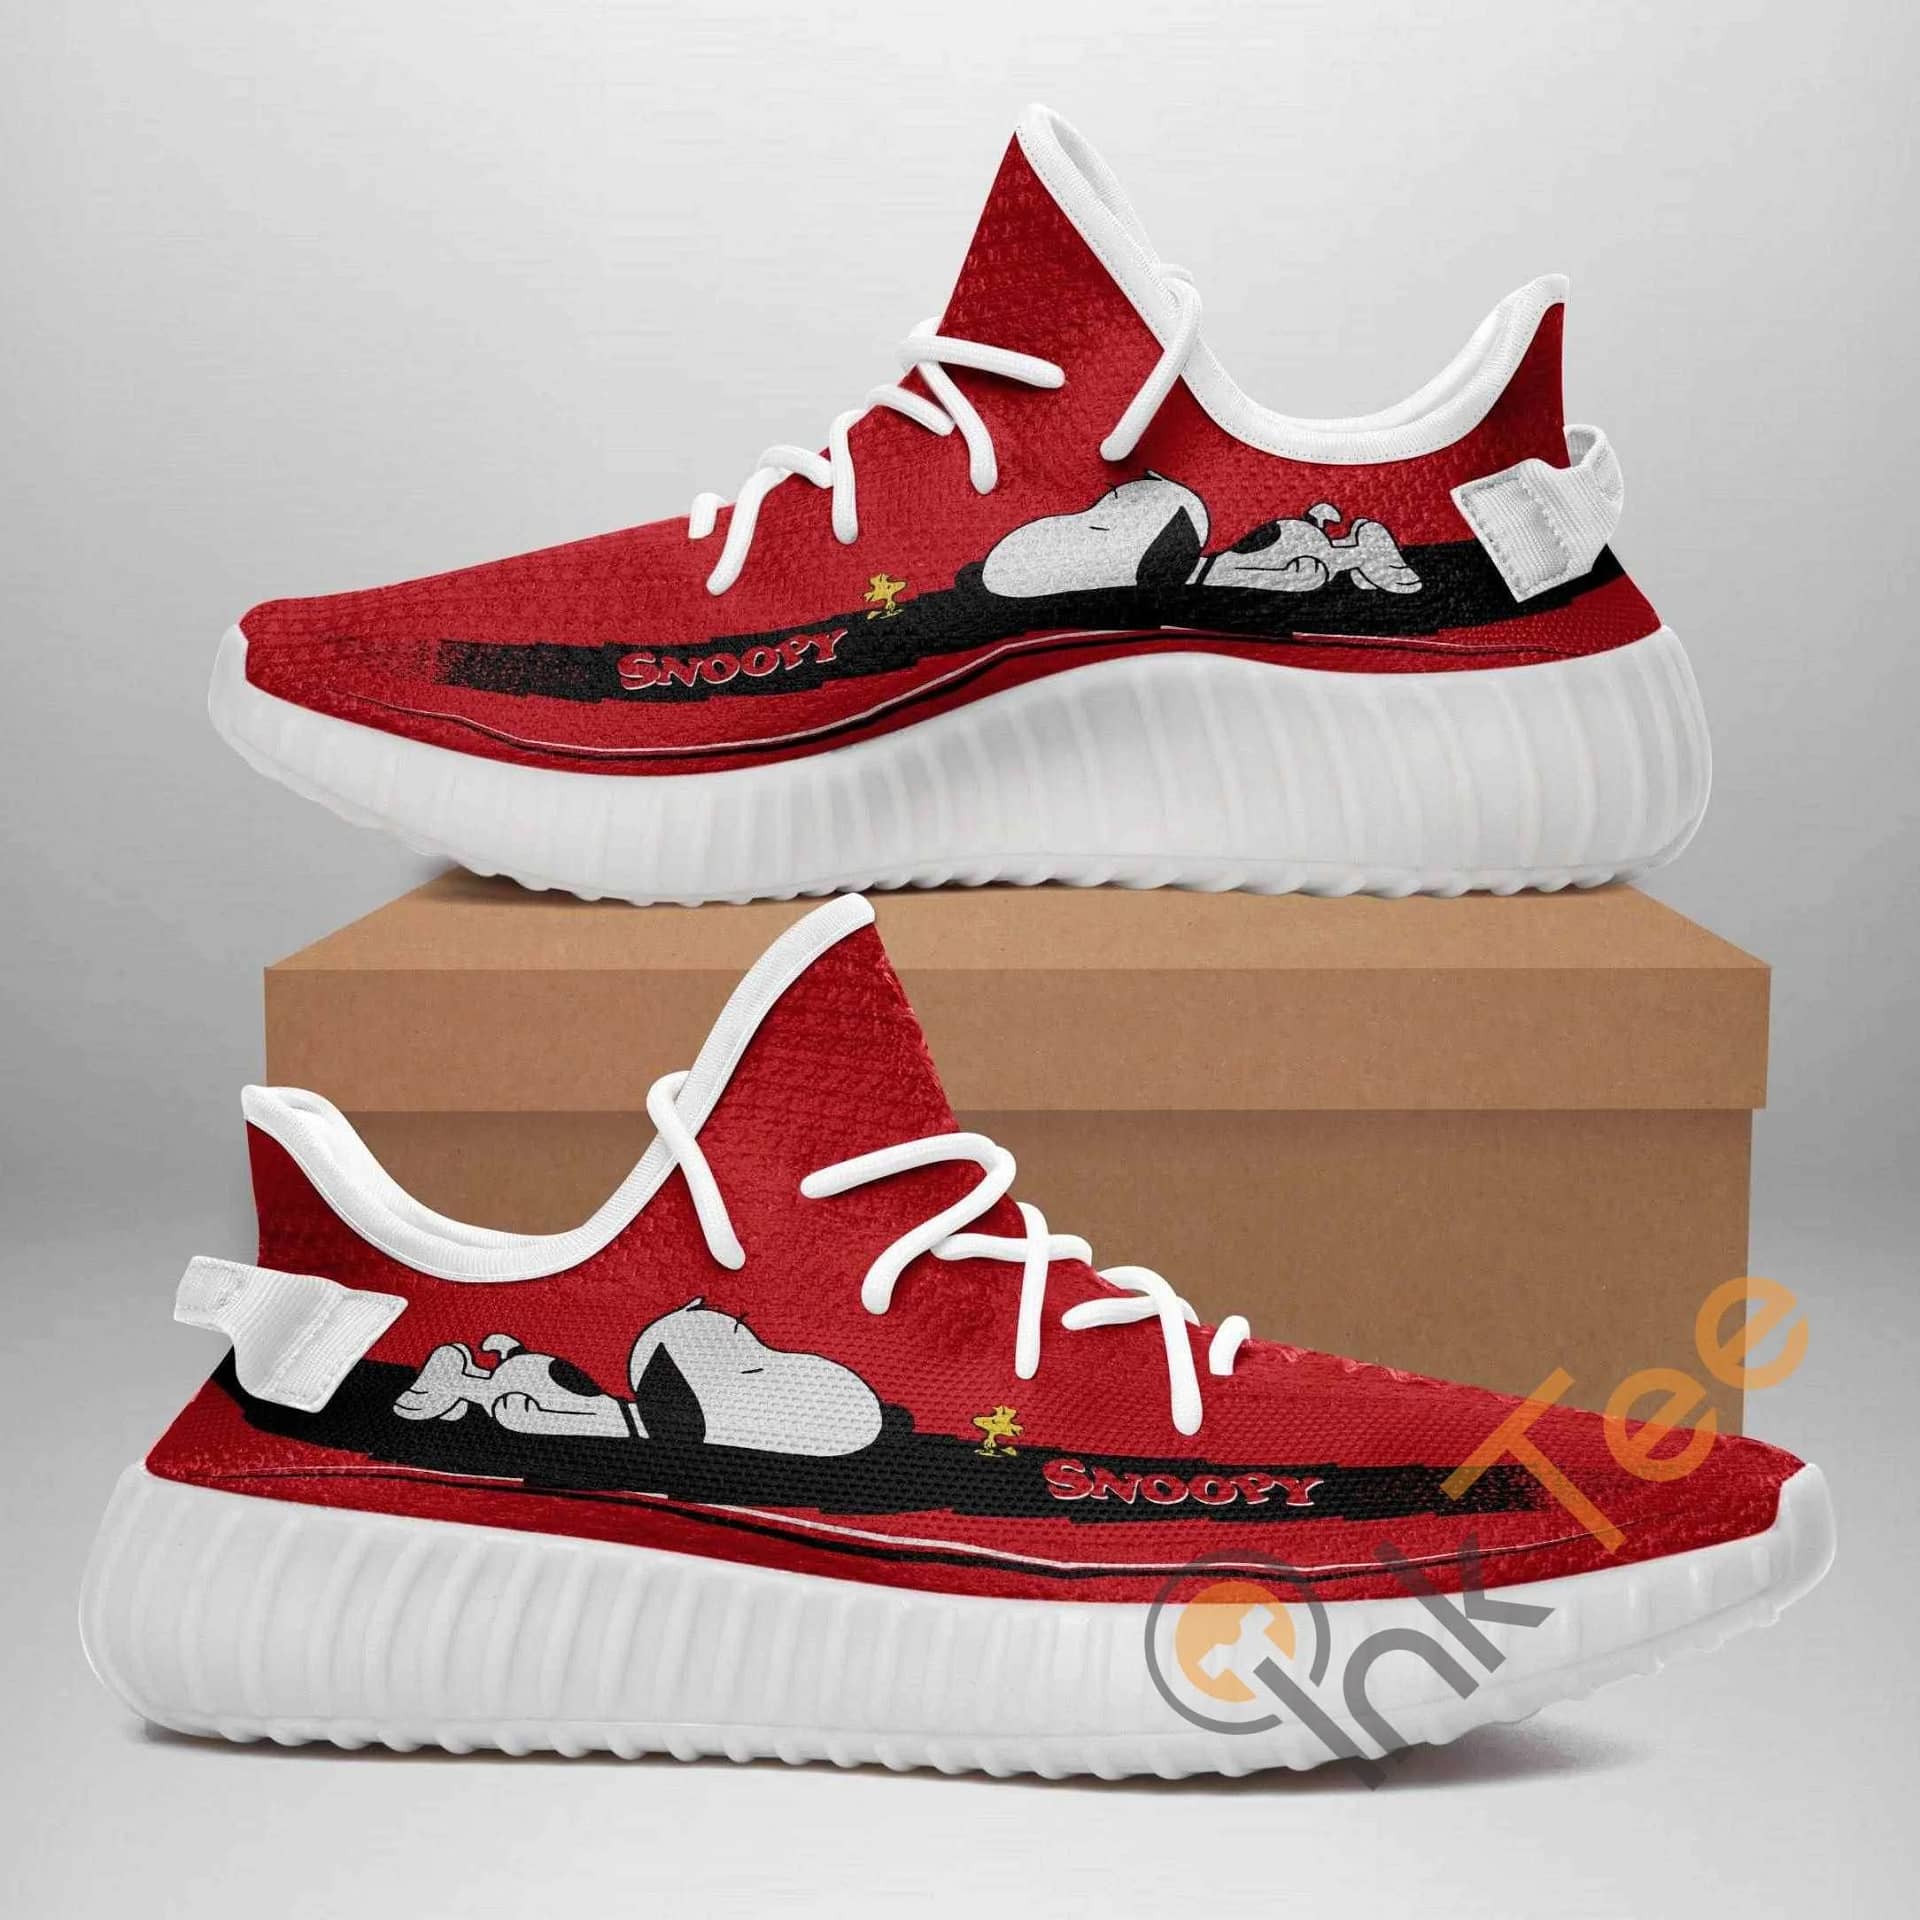 Snoopy Rb Amazon Best Selling Yeezy Boost